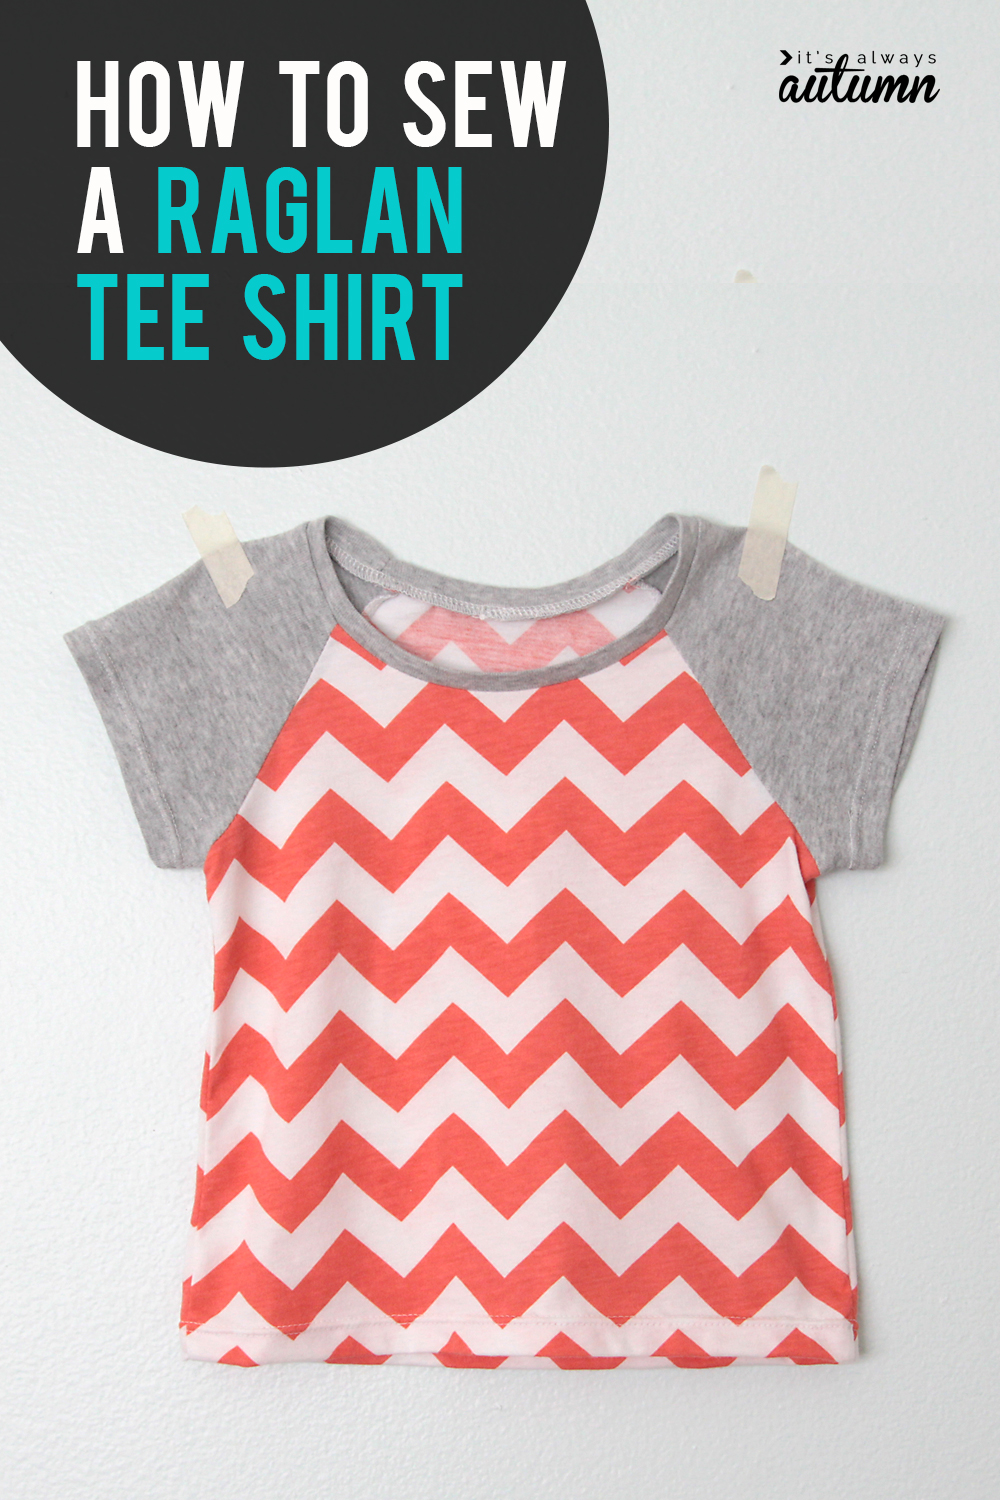 Learn how to create your own raglan shirt pattern in any size! How to sew a baseball sleeve top.